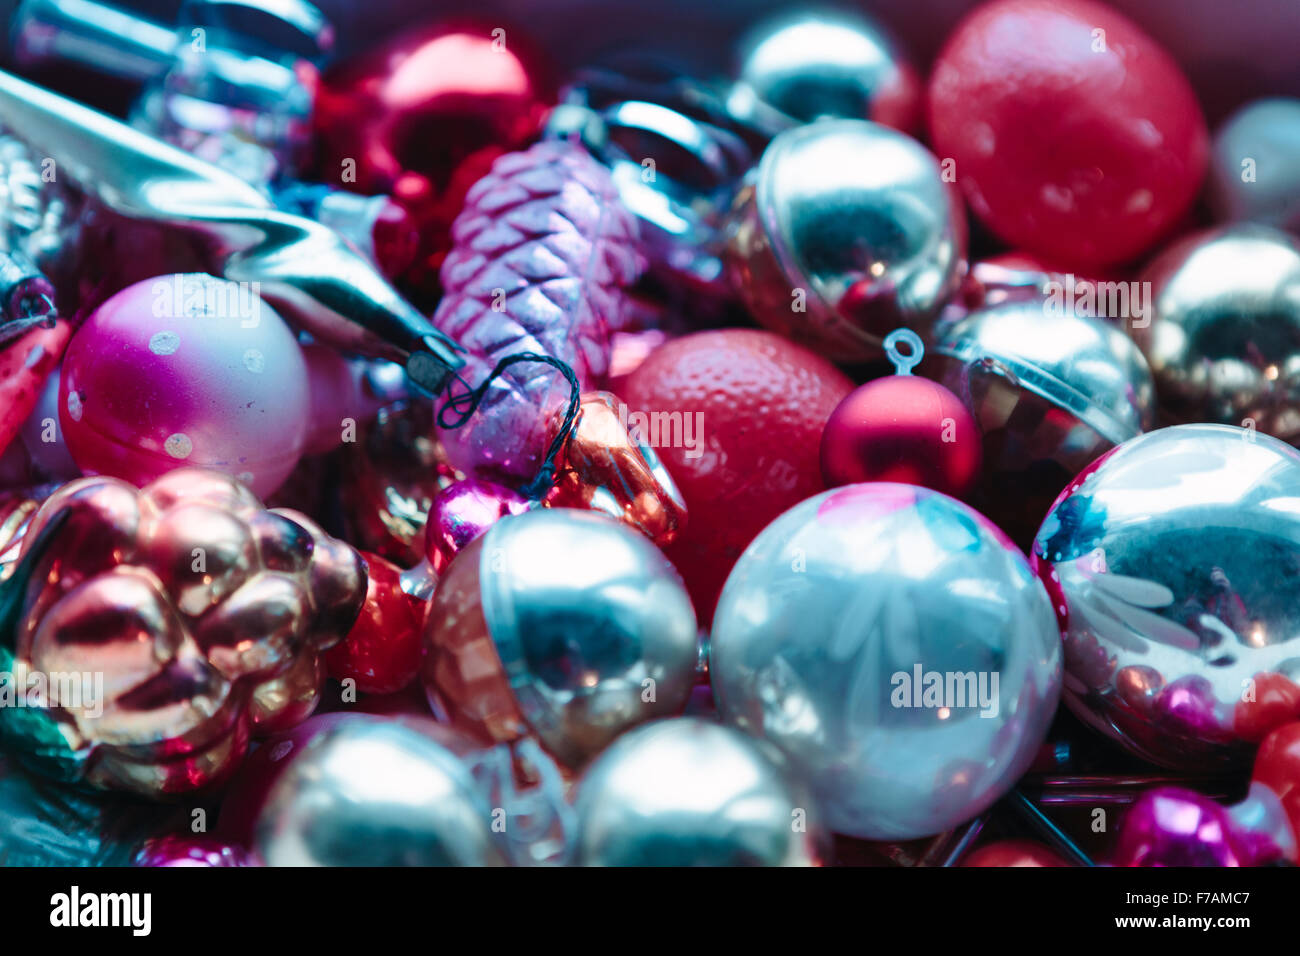 Many beautiful christmas or new year fir tree decoration colorful toys. Stock Photo